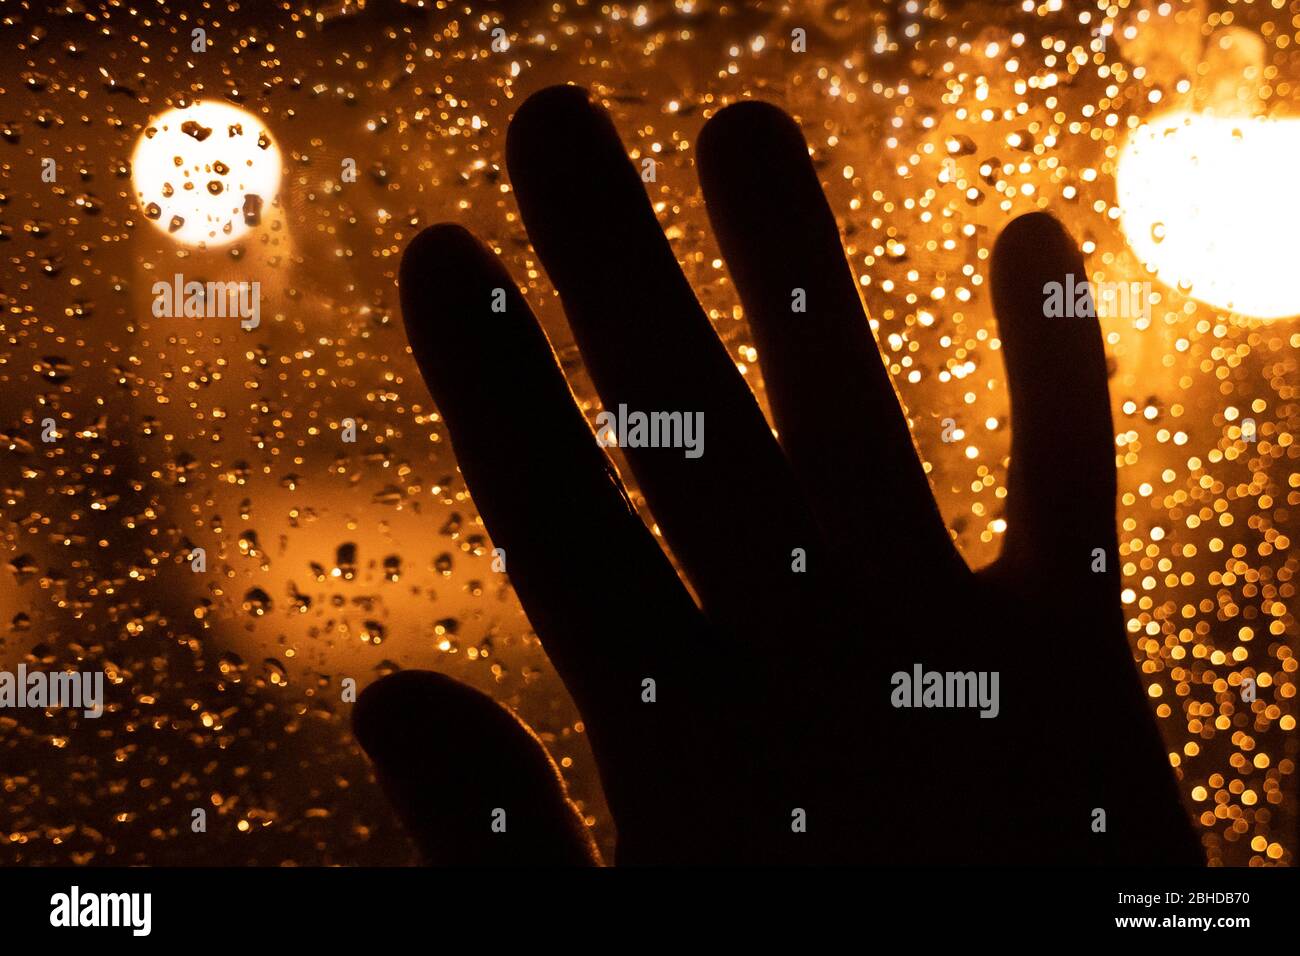 Silhouette of a hand leaning against the window at night with drops of water. Sad image of melancholy looking out from the sleeping room. Stock Photo